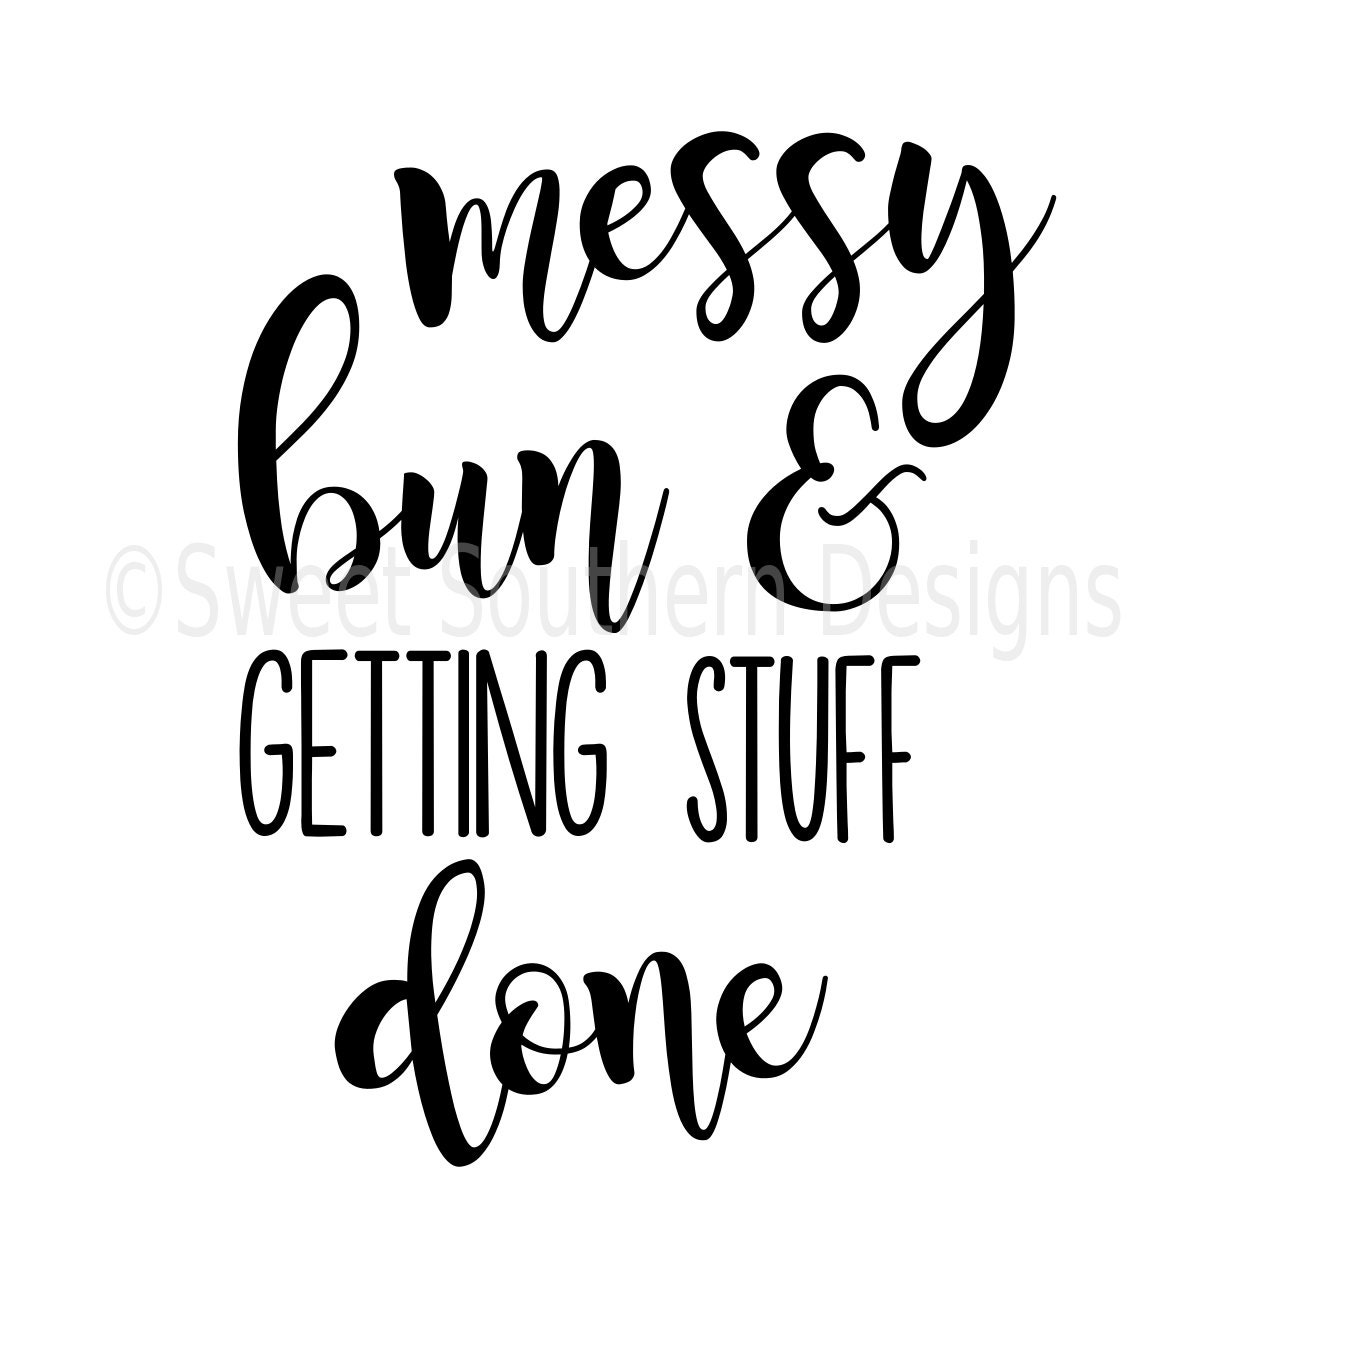 Download messy bun and getting stuff done momlife DXF SVG instant